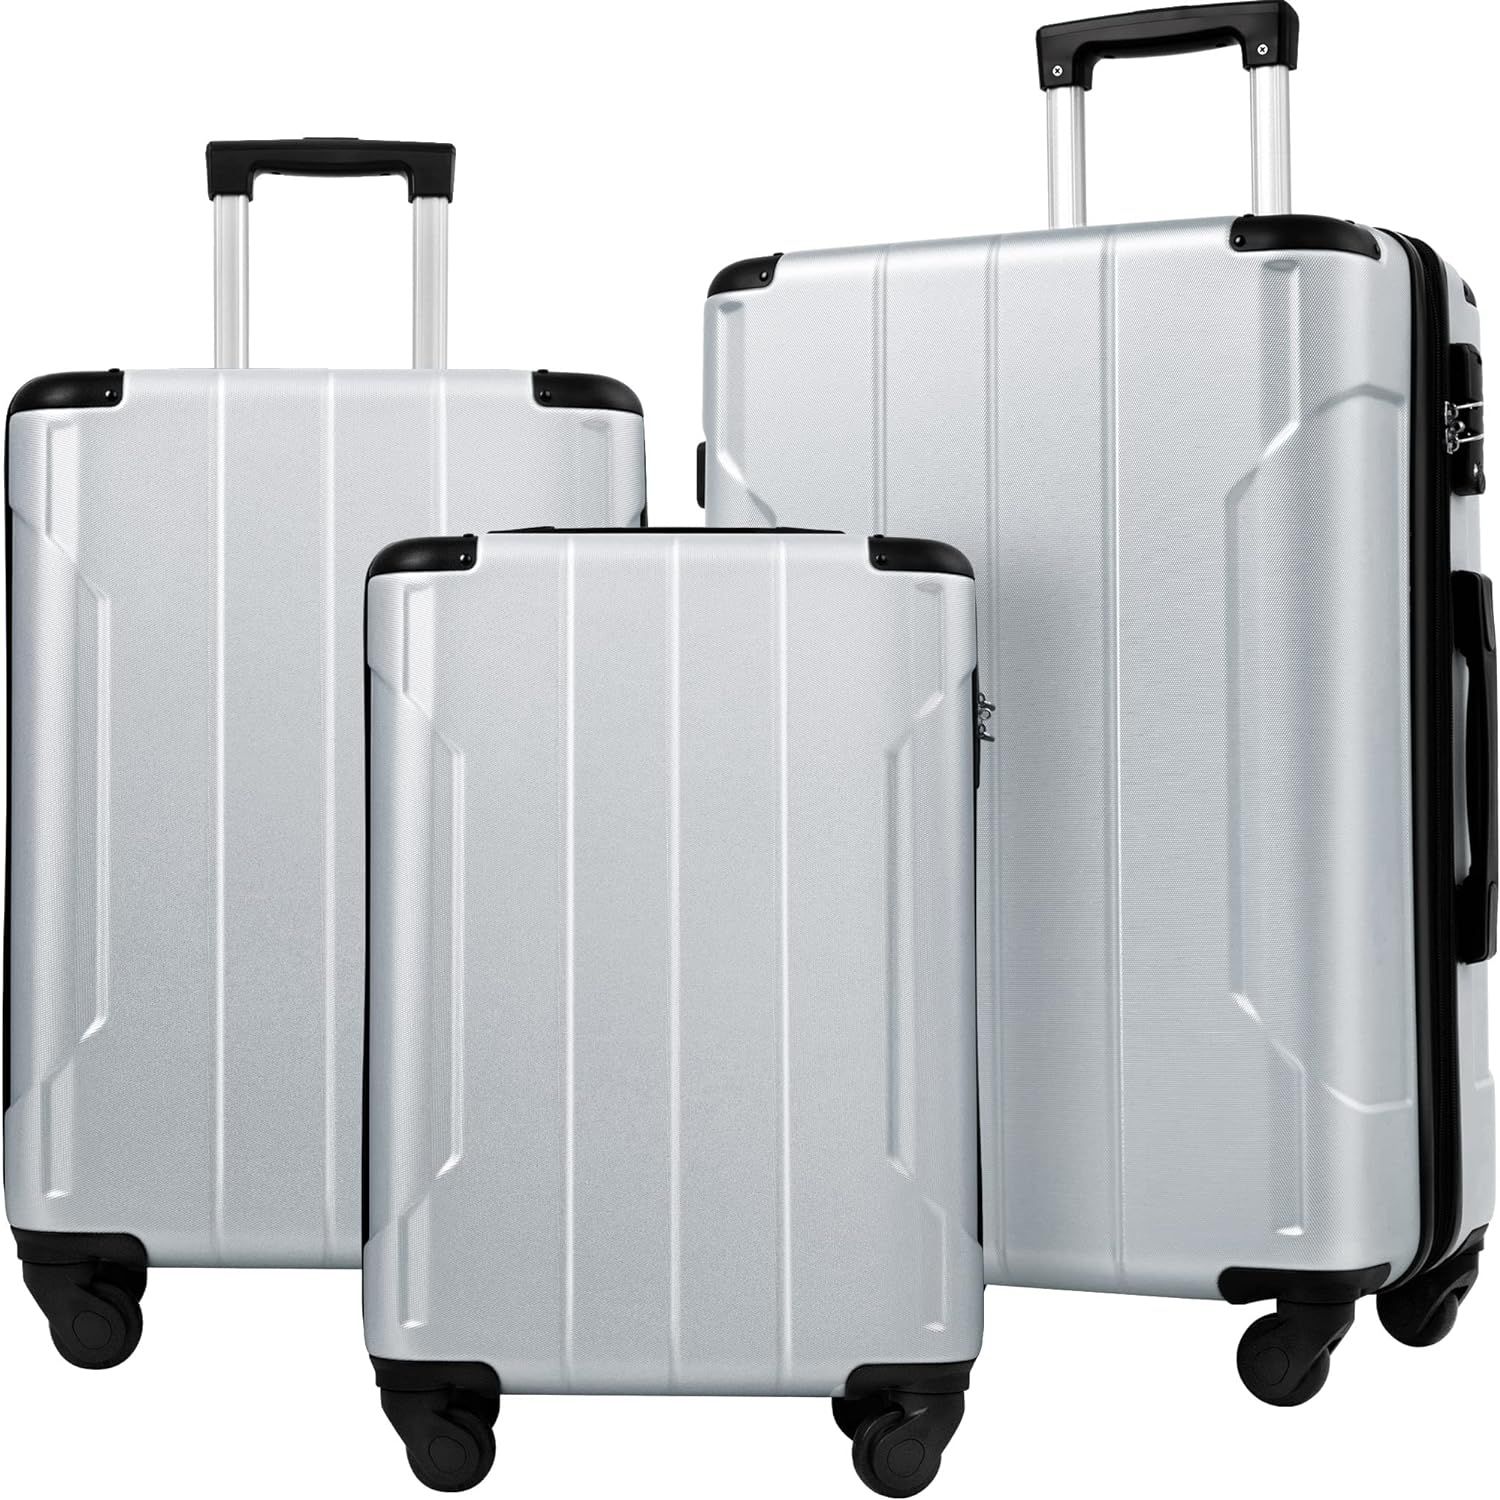 Merax Luggage Set 3 Piece Expandable Lightweight Spinner Suitcase with Corner Guards (Silver.) | Amazon (US)